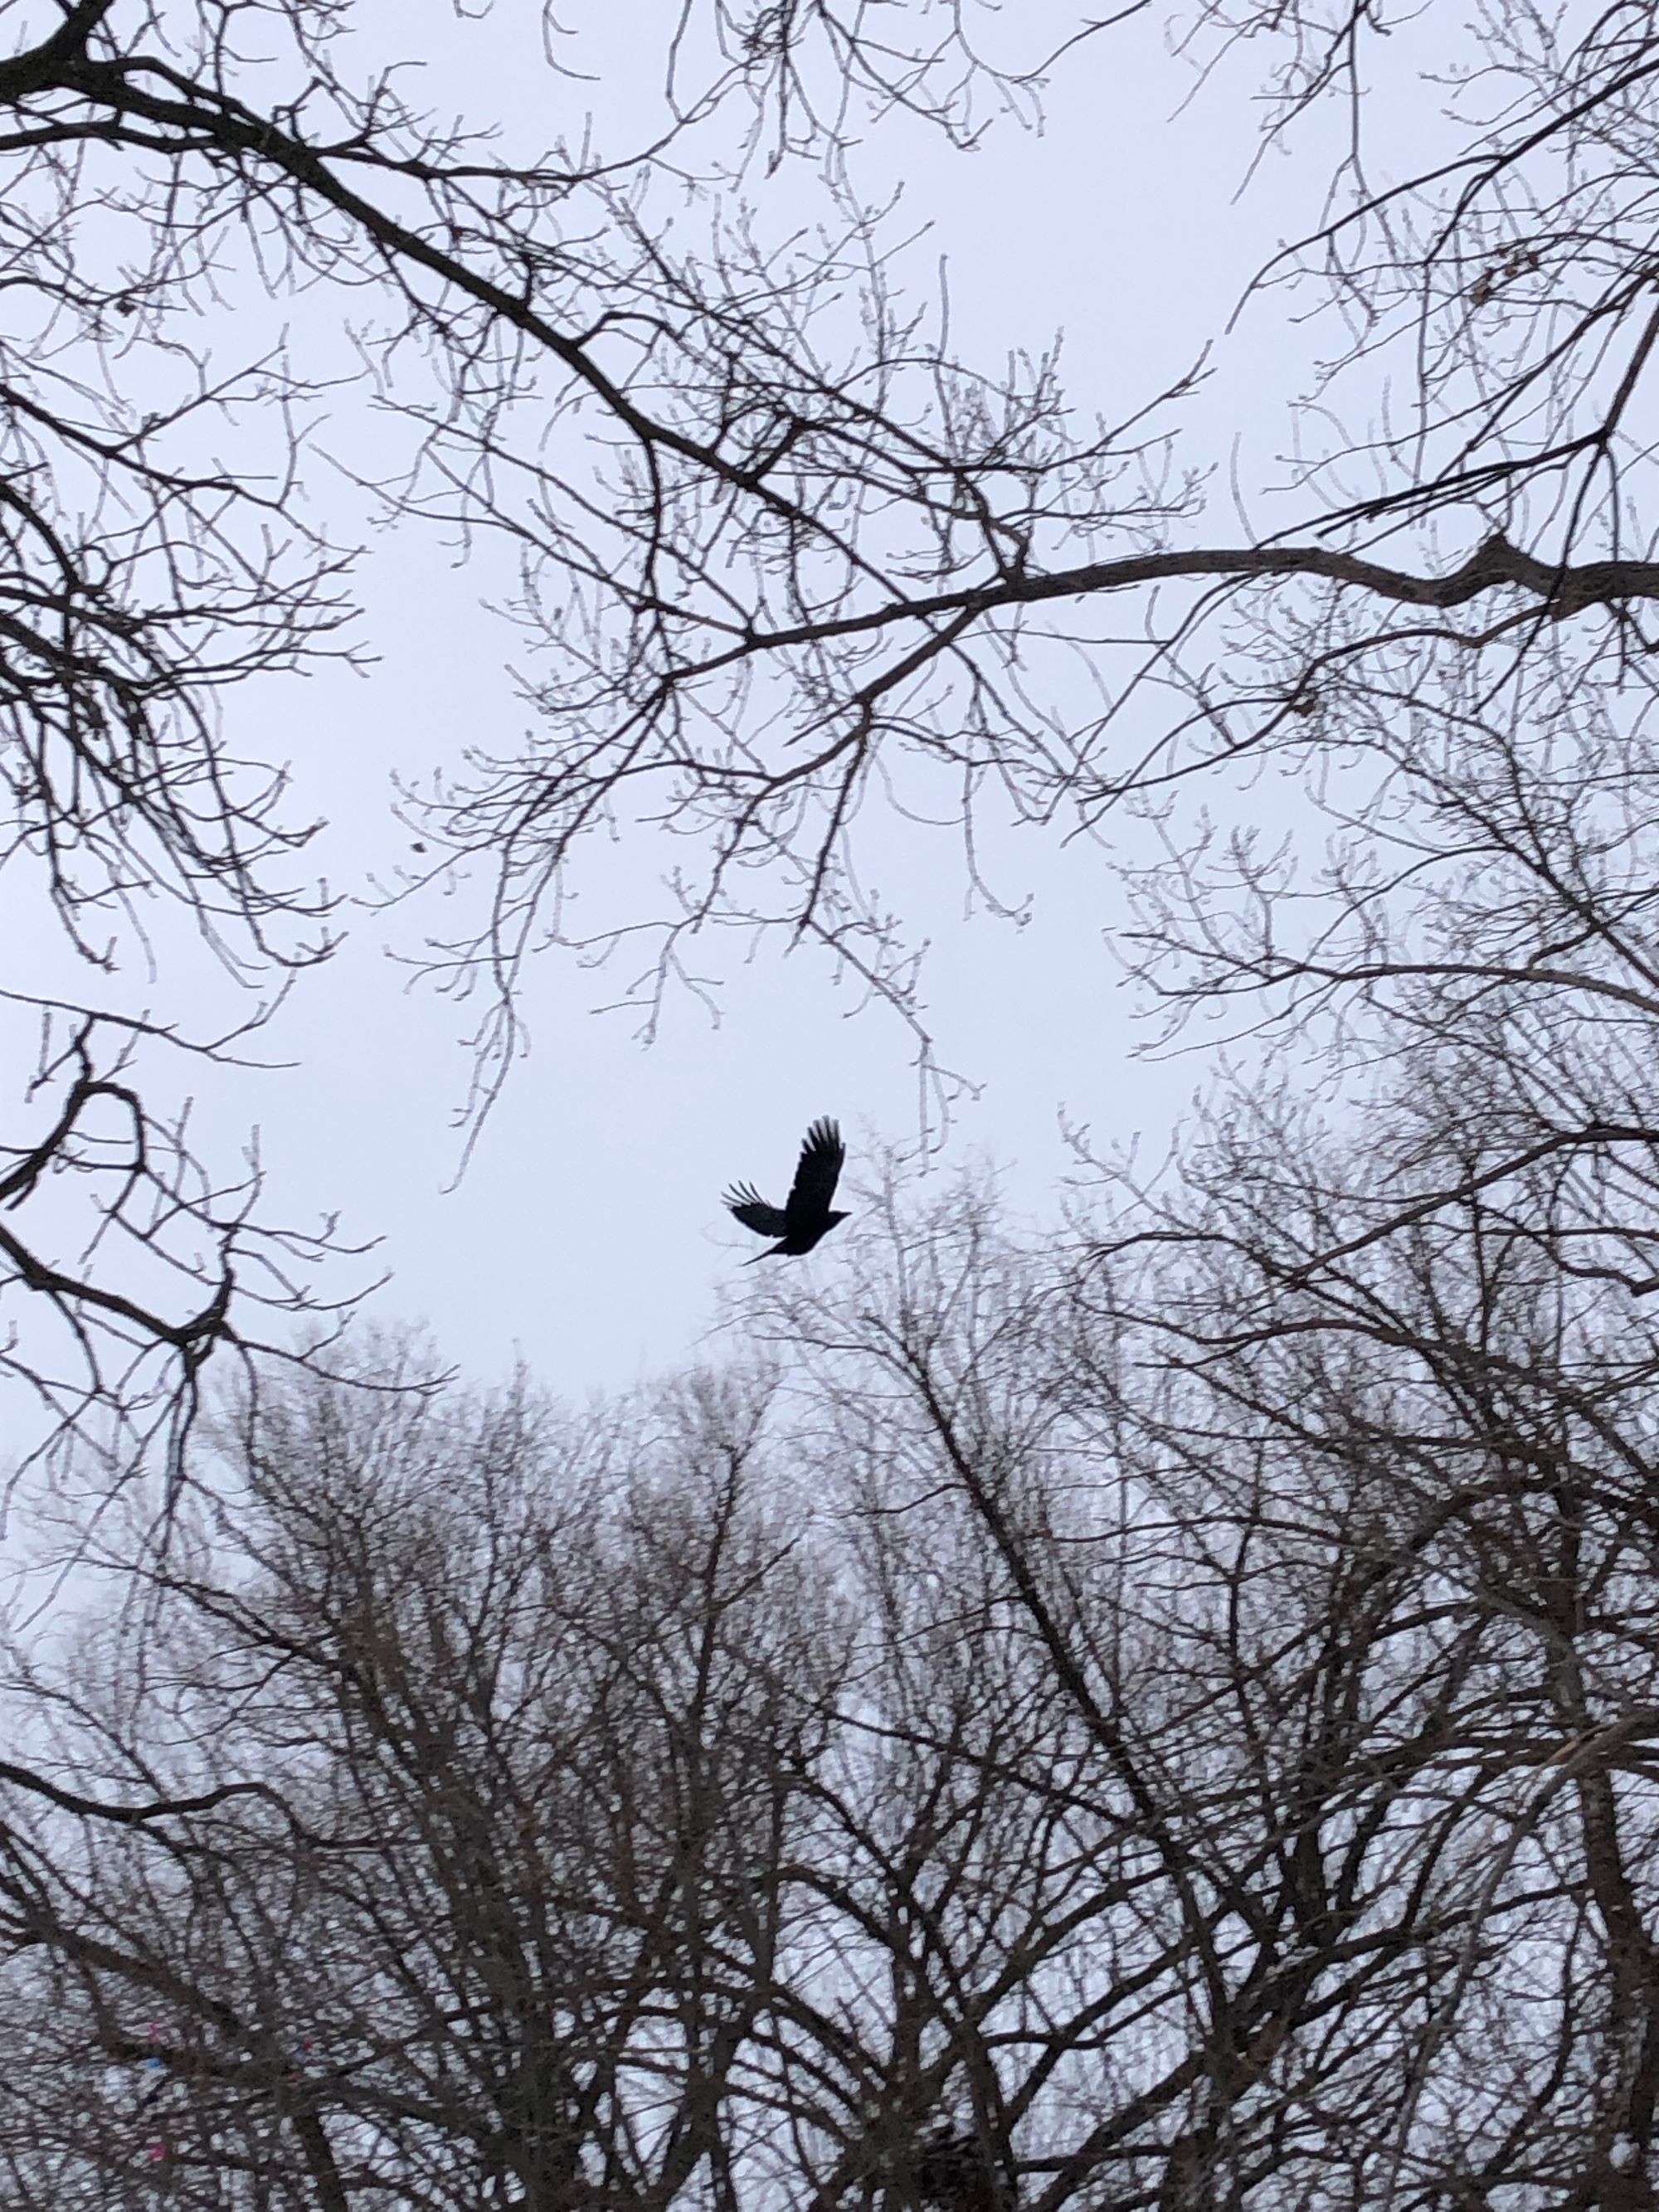 Slightly blurry iPhone photo capturing a crow in flight against a pale grey sky, surrounded by bare winter branches.